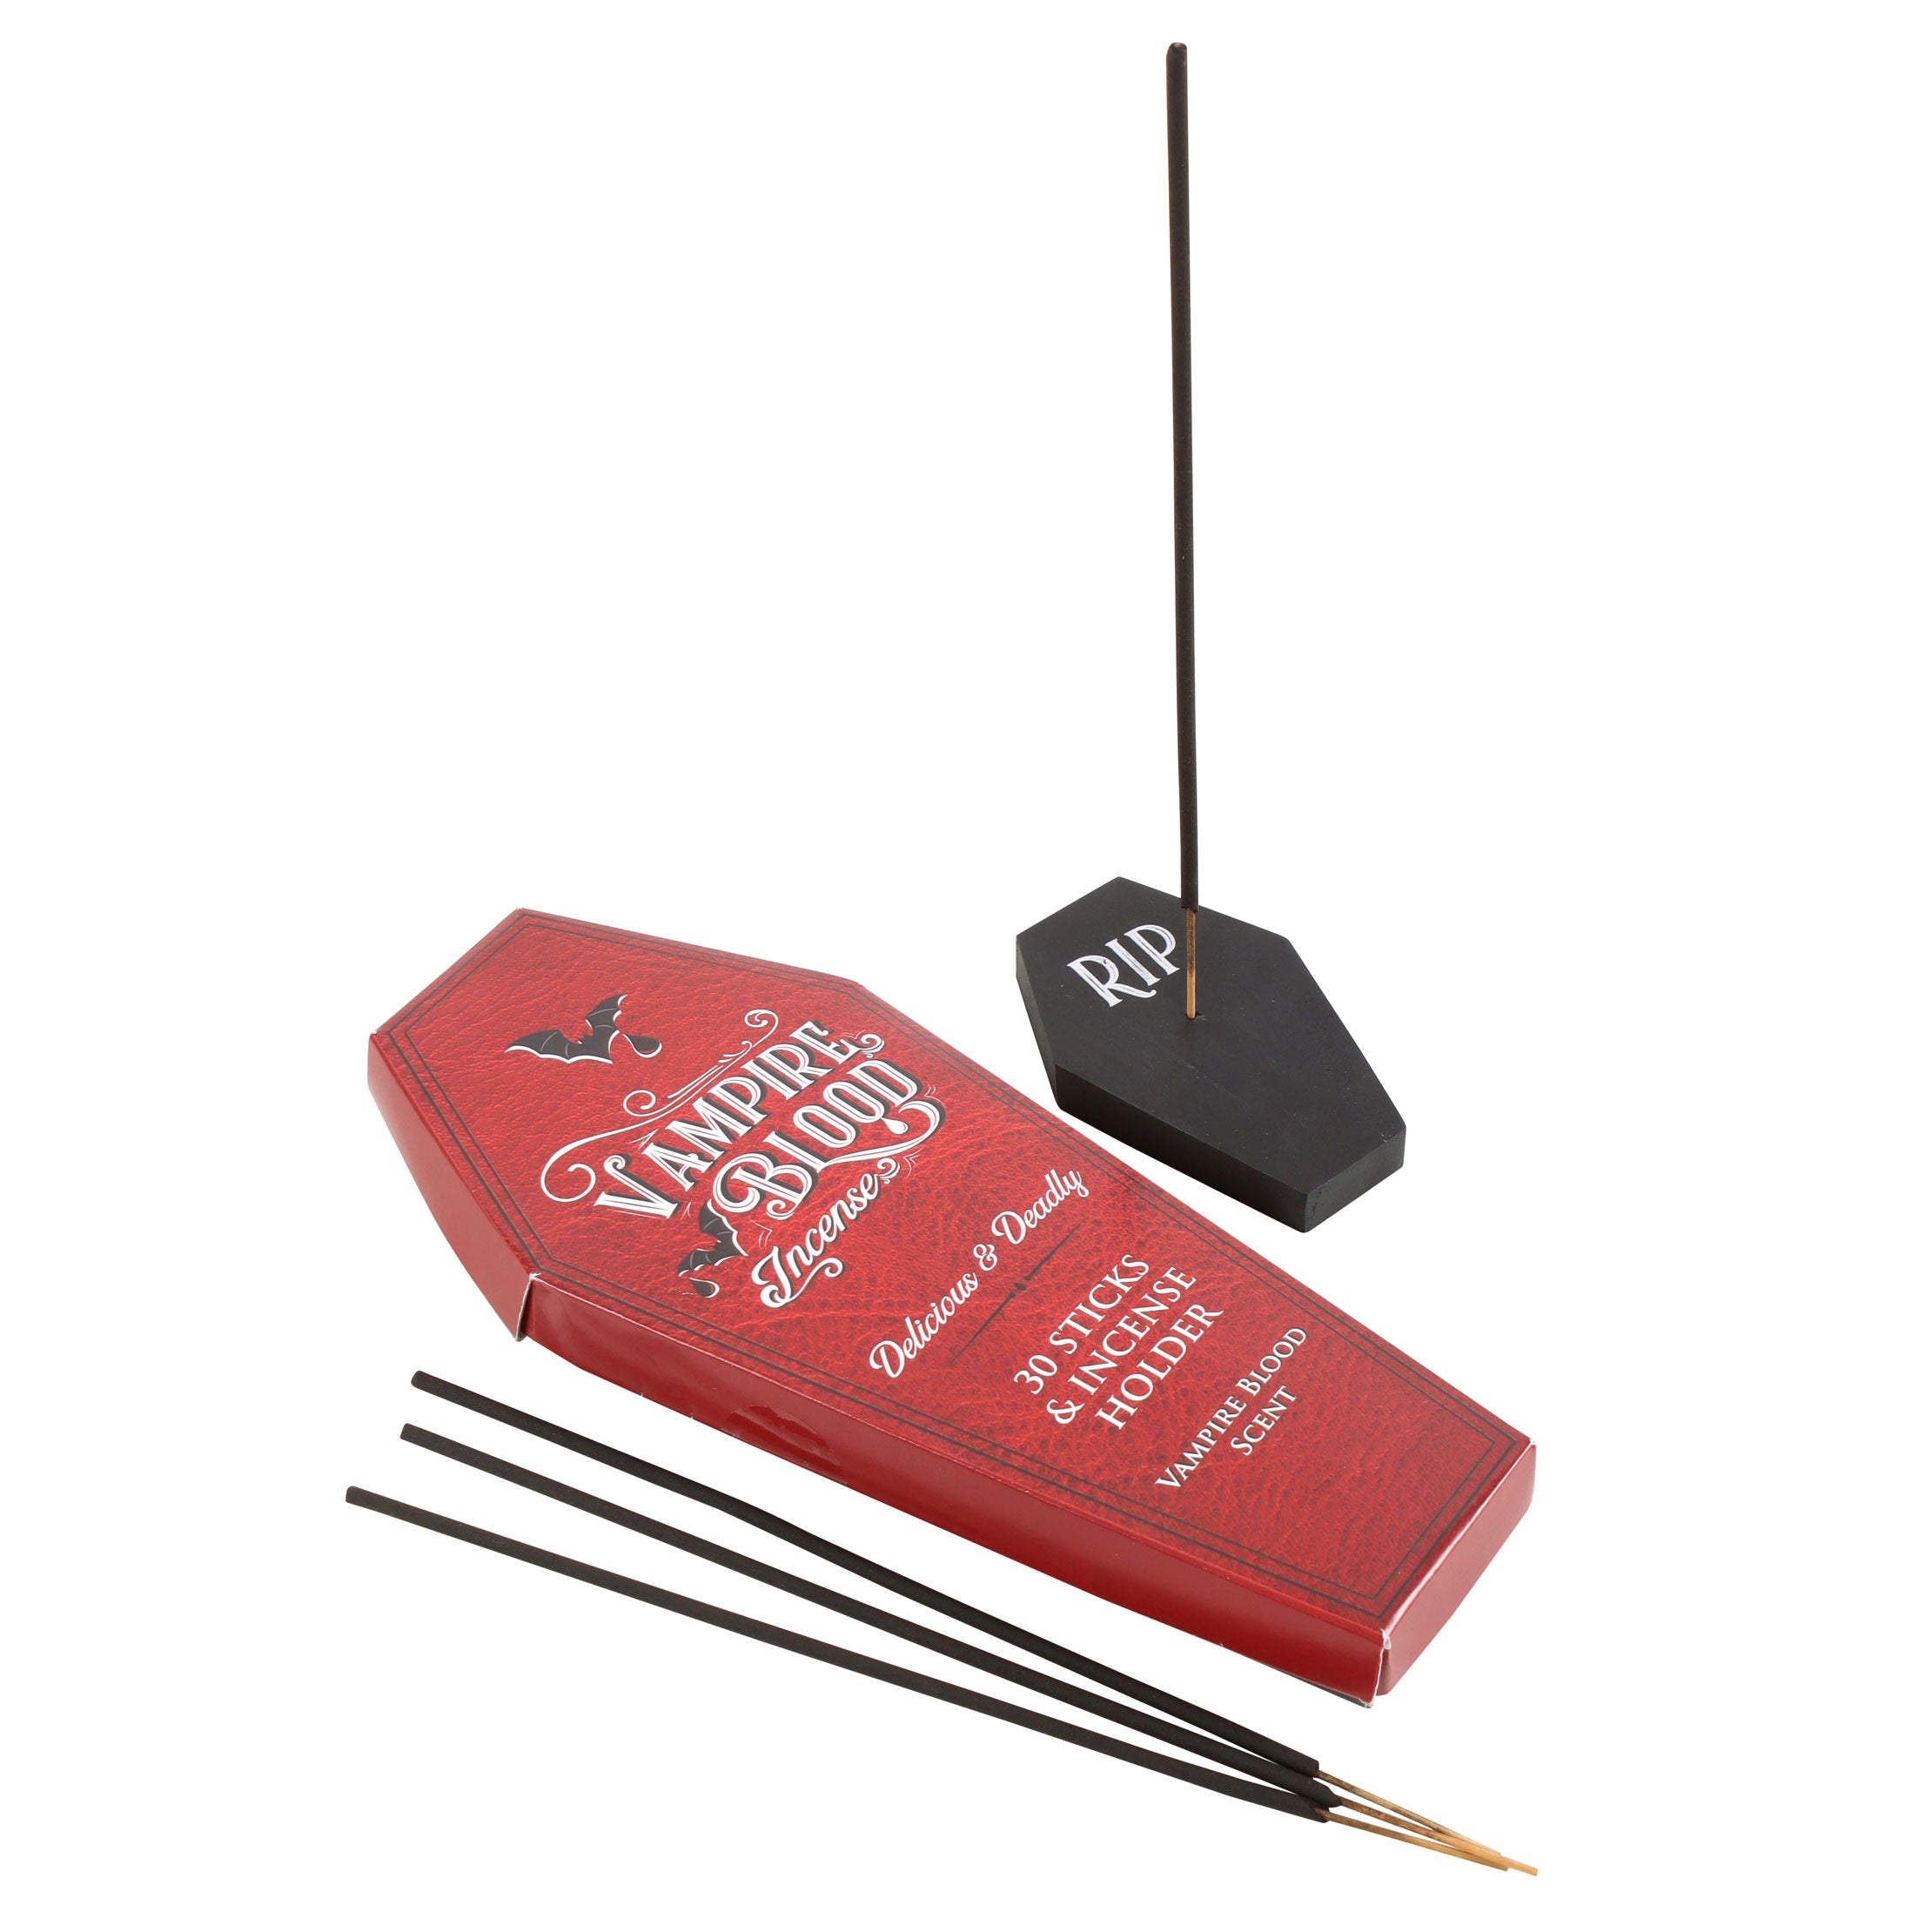 View Set of 18 Vampire Blood Incense Stick Packs with Coffin Holder information